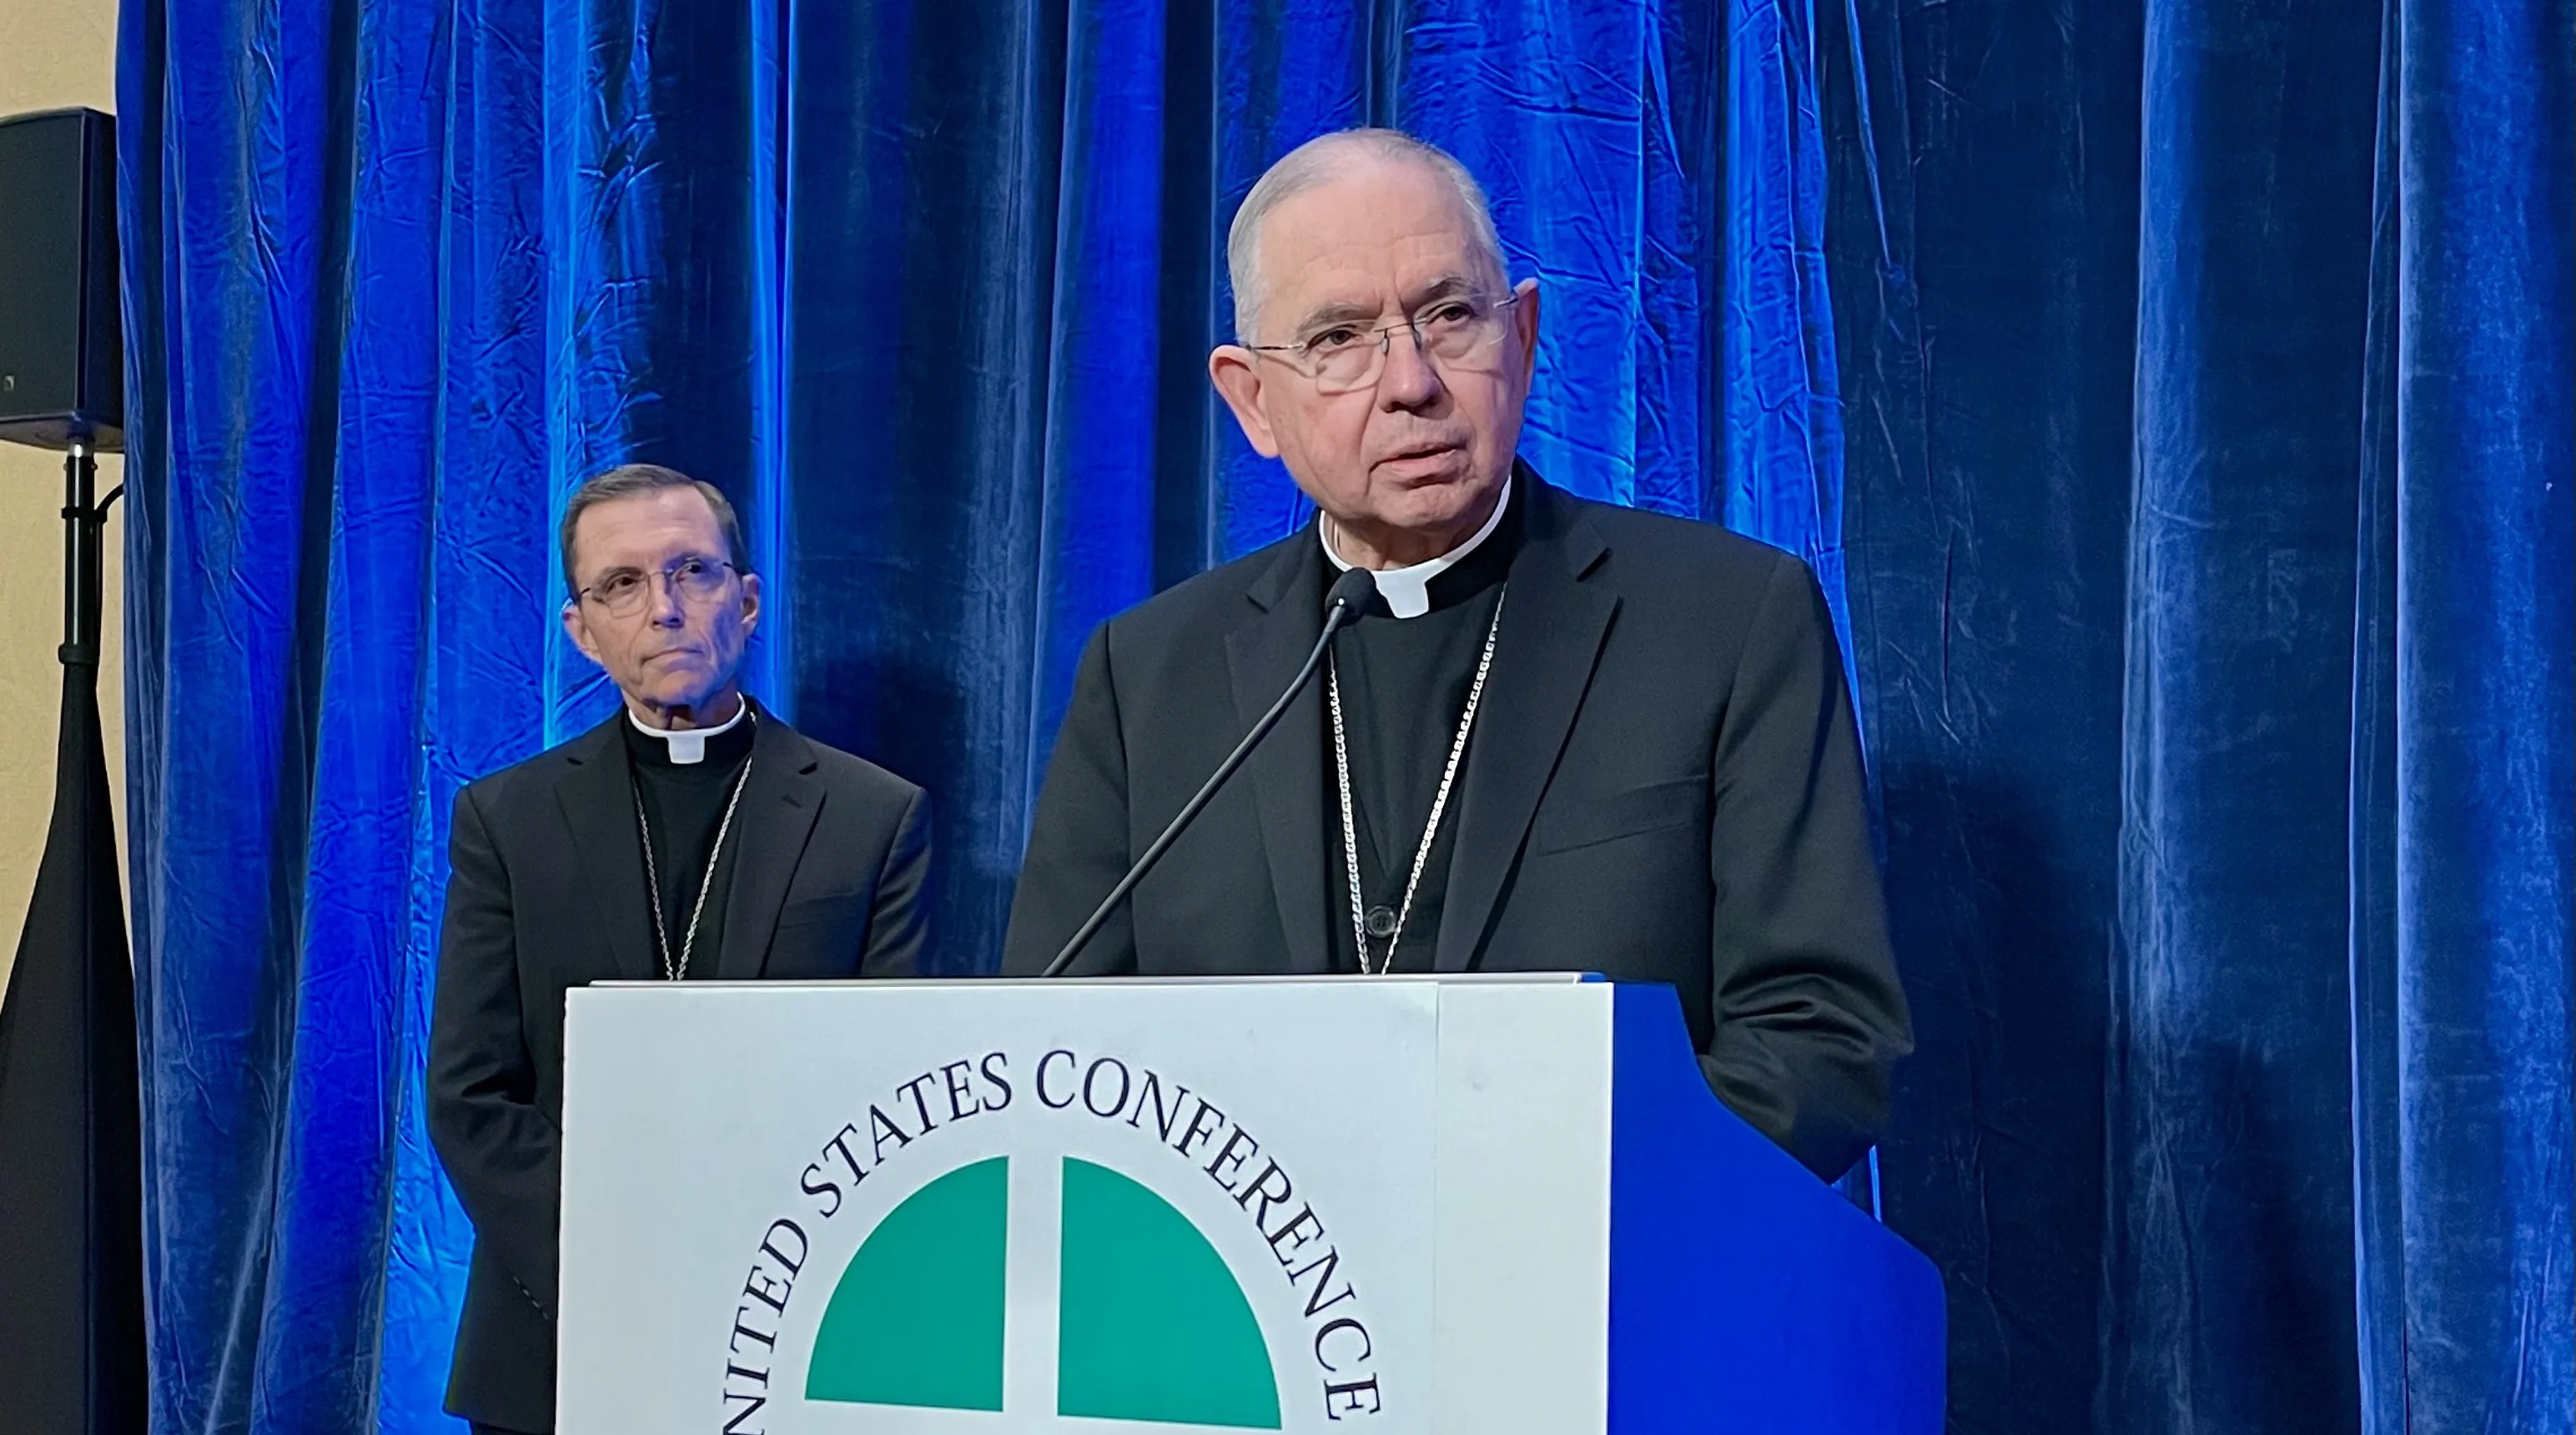 Archbishop José H. Gomez of Los Angeles, the outgoing president of the United States Conference of Catholic Bishops, speaking on Nov. 15, 2022, at the conference’s fall assembly in Baltimore.?w=200&h=150